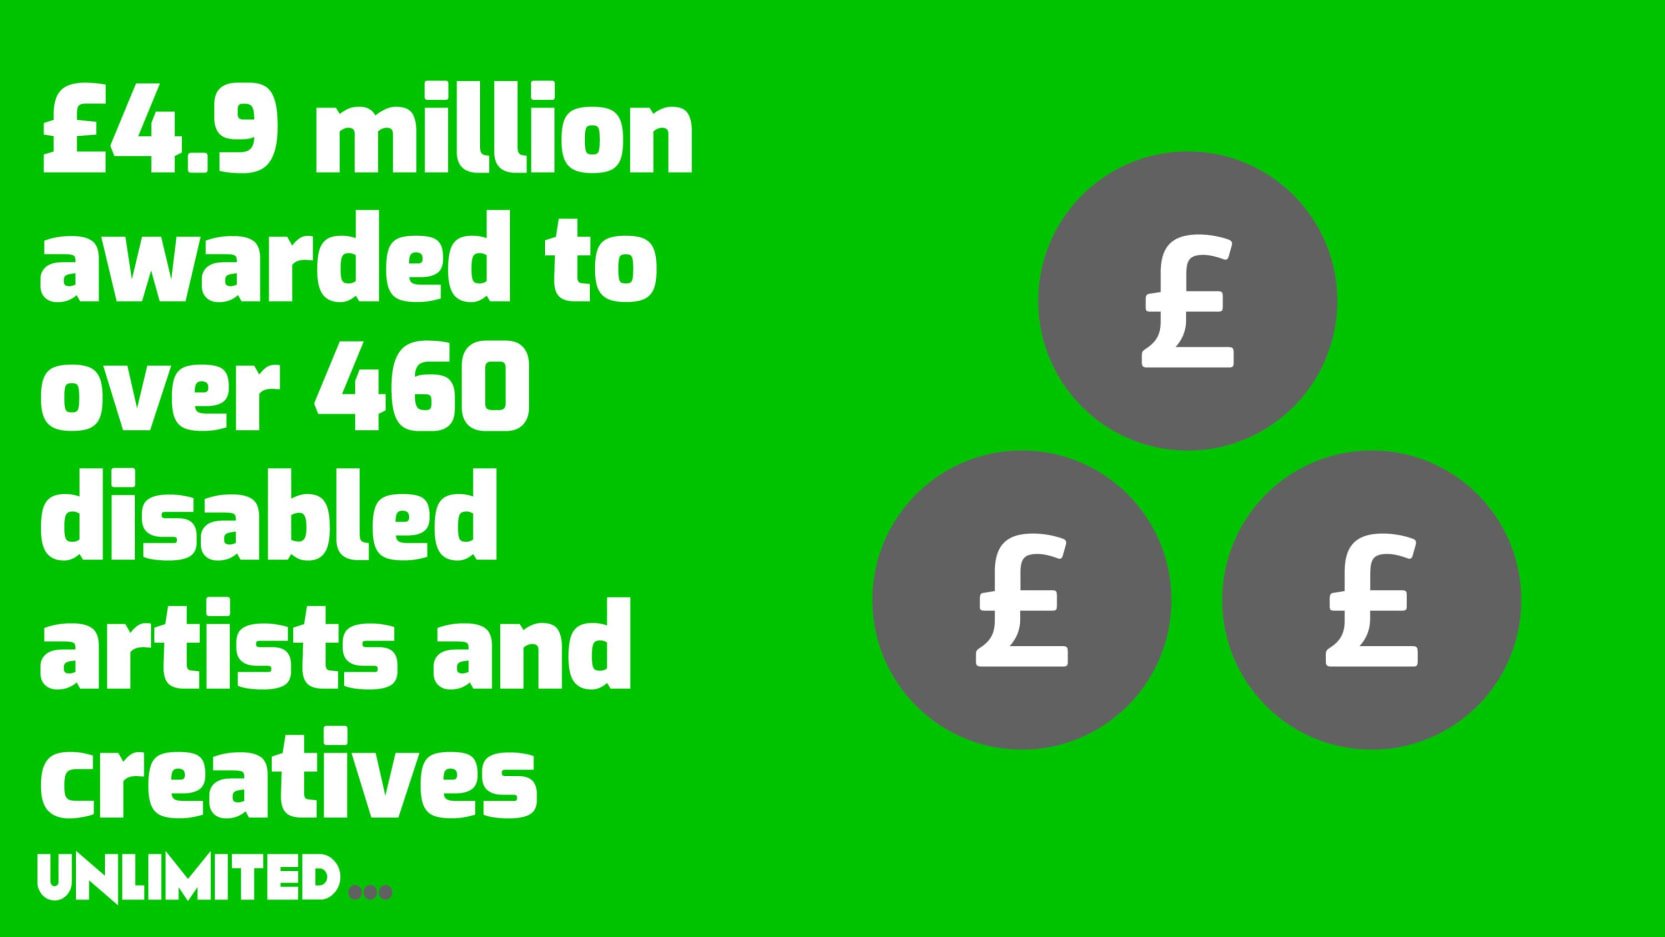 Green infographic stating that £4.9 million has been awarded to over 460 disabled artists and creatives by Unlimited.